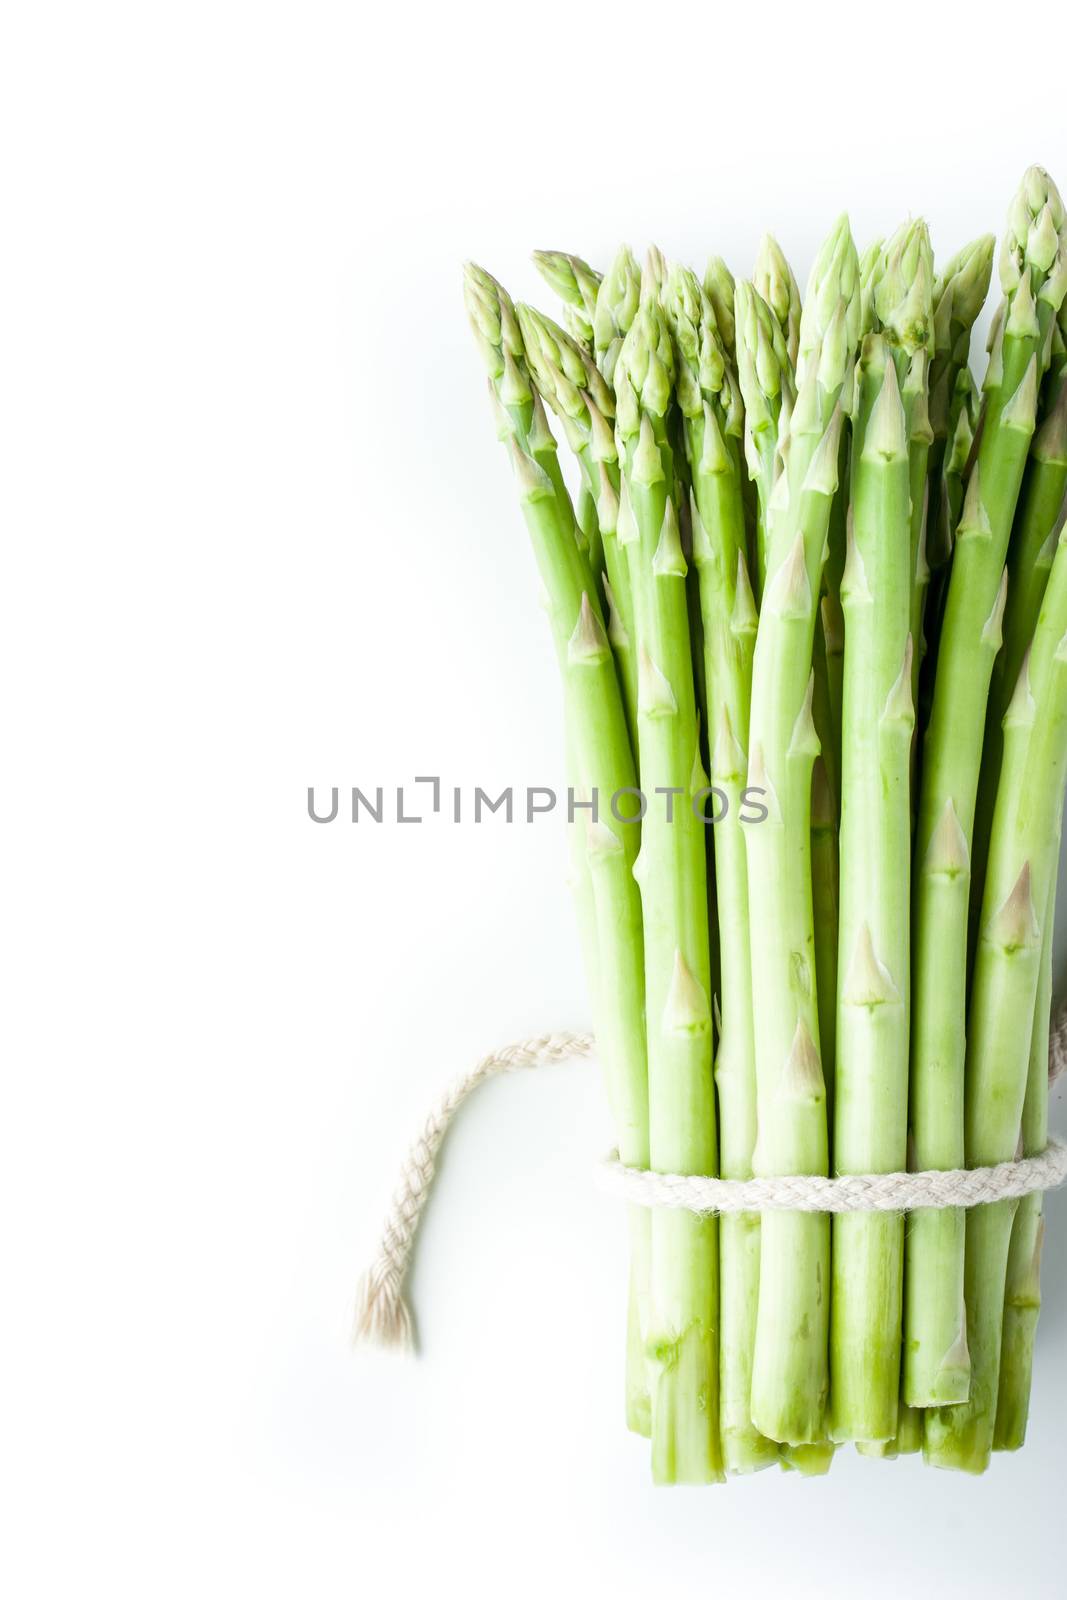 Bundle of asparagus at the right by Deniskarpenkov